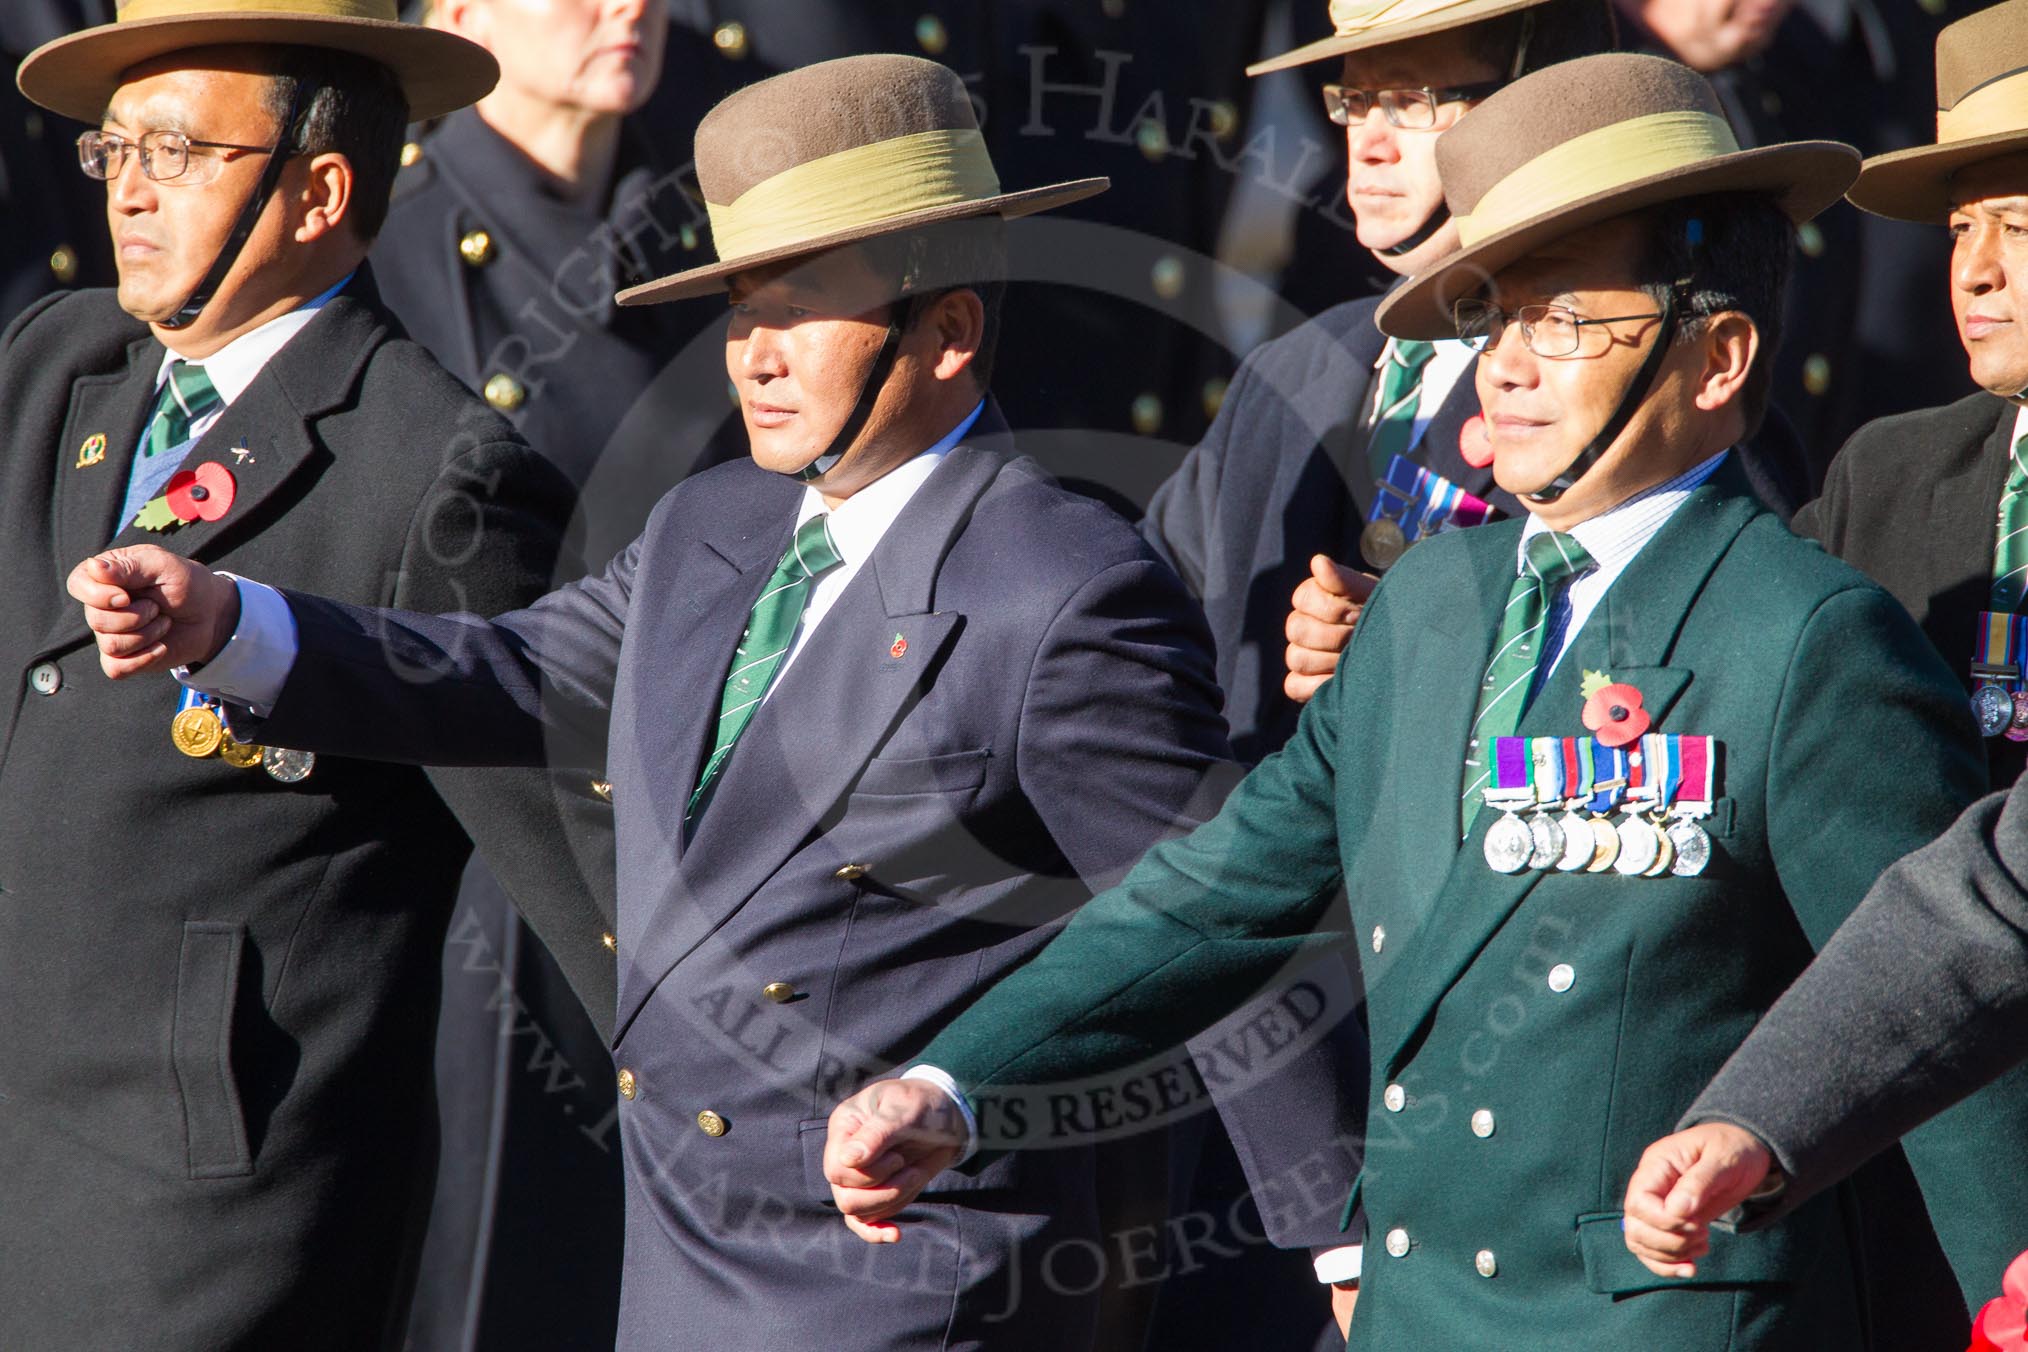 Remembrance Sunday Cenotaph March Past 2013: D2 - British Gurkha Welfare Association..
Press stand opposite the Foreign Office building, Whitehall, London SW1,
London,
Greater London,
United Kingdom,
on 10 November 2013 at 11:38, image #31